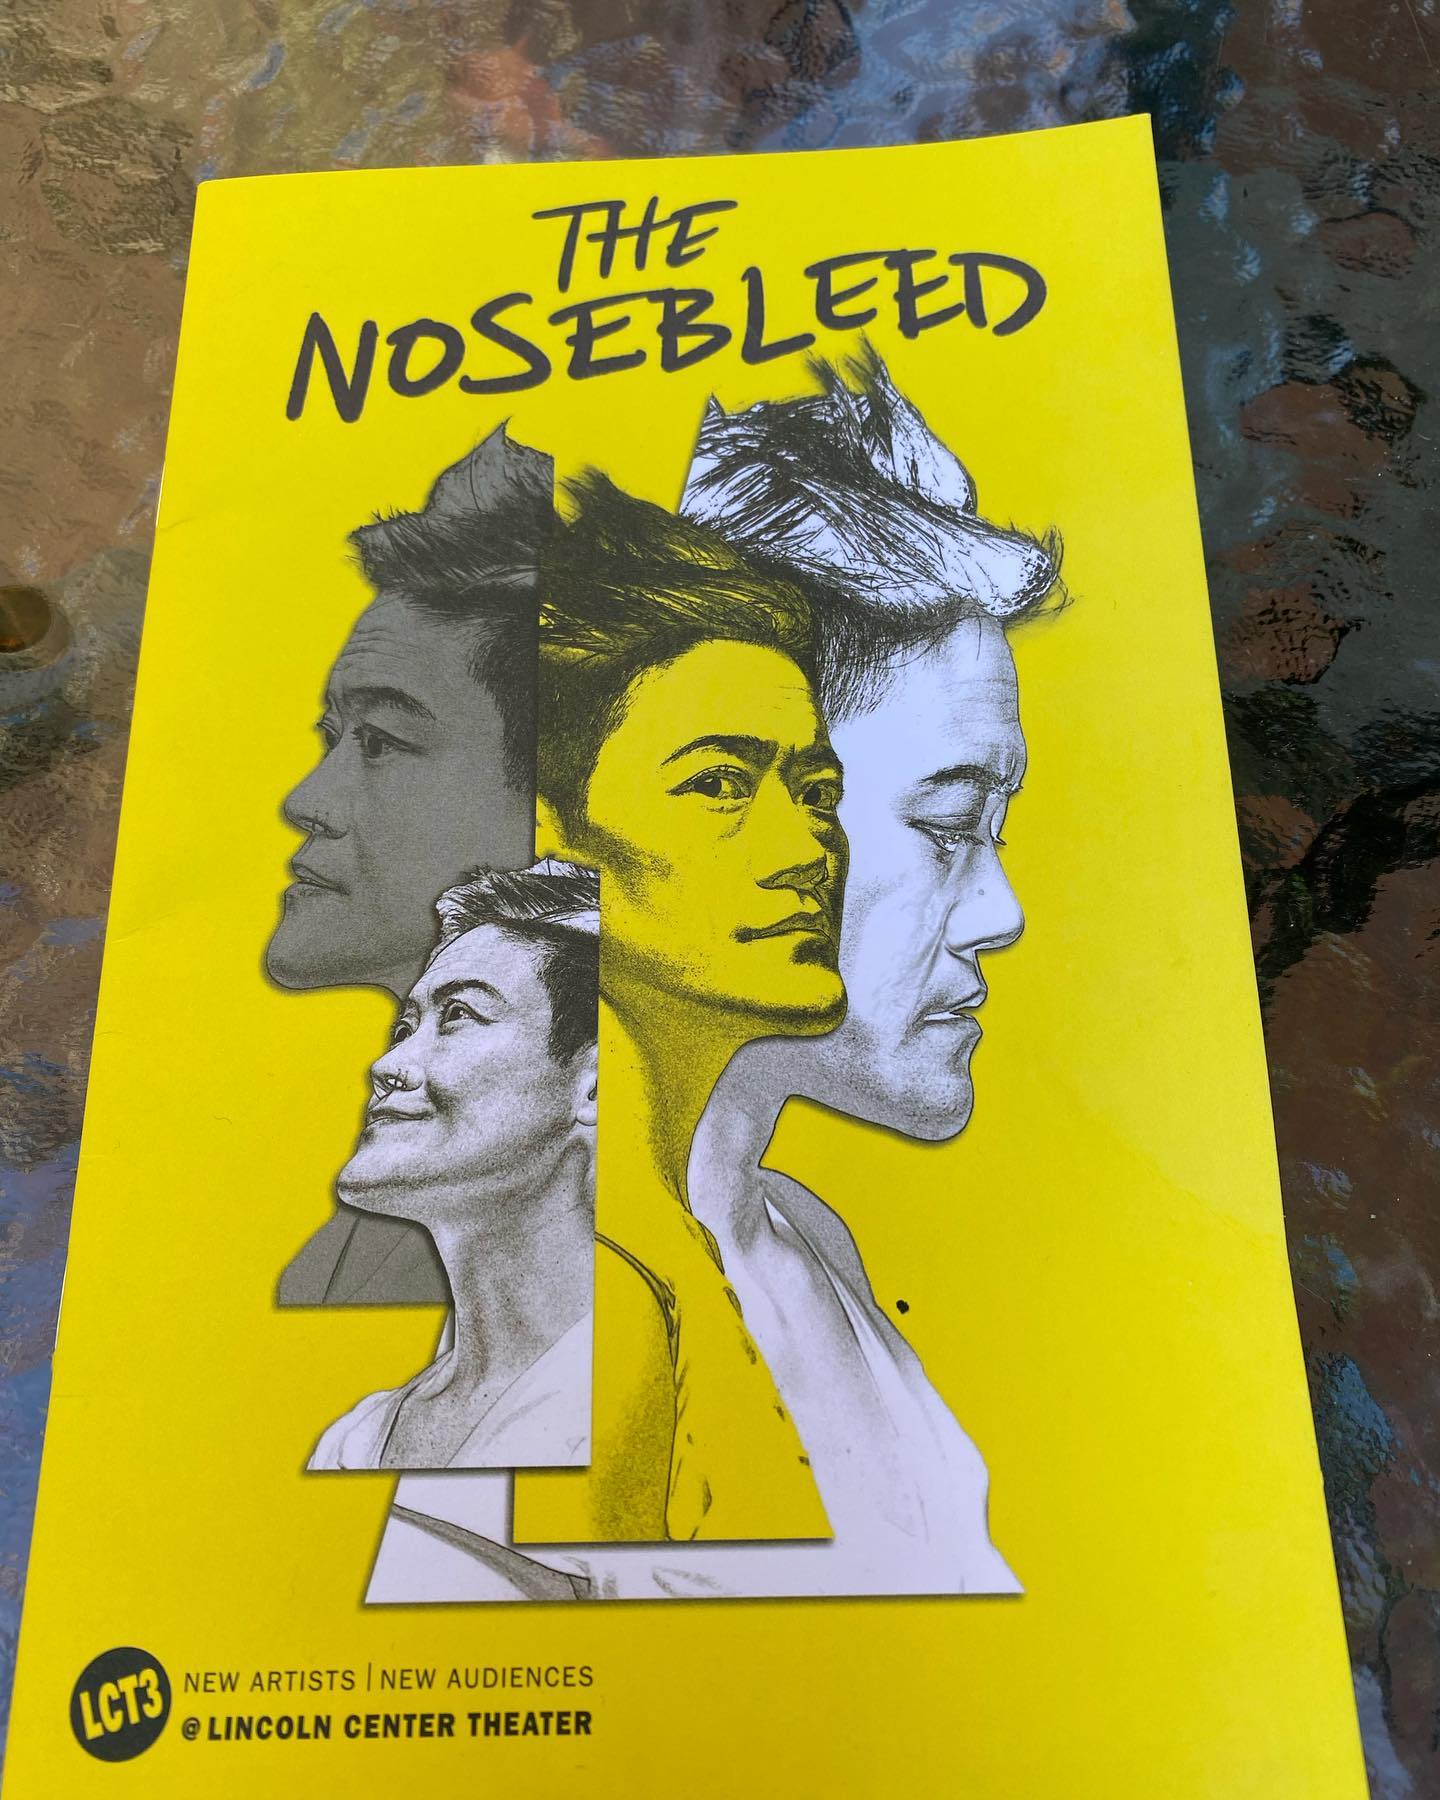 Aya Ogawa’s The Nosebleed is provocative in form and structure, including a malleable fourth wall. At the same time it is so specifically personal that it offers all of us (including my wonderful three companions and I) the opportunity to relate.  @lctheater at the Claire Tow is a fantastic space to see new, fresh work!! #lincolncentertheater #offbroadway #offbroadwayplay #nyctheatre #newplays #livetheatre #playwrights #ilovetheatre #funwithfriends